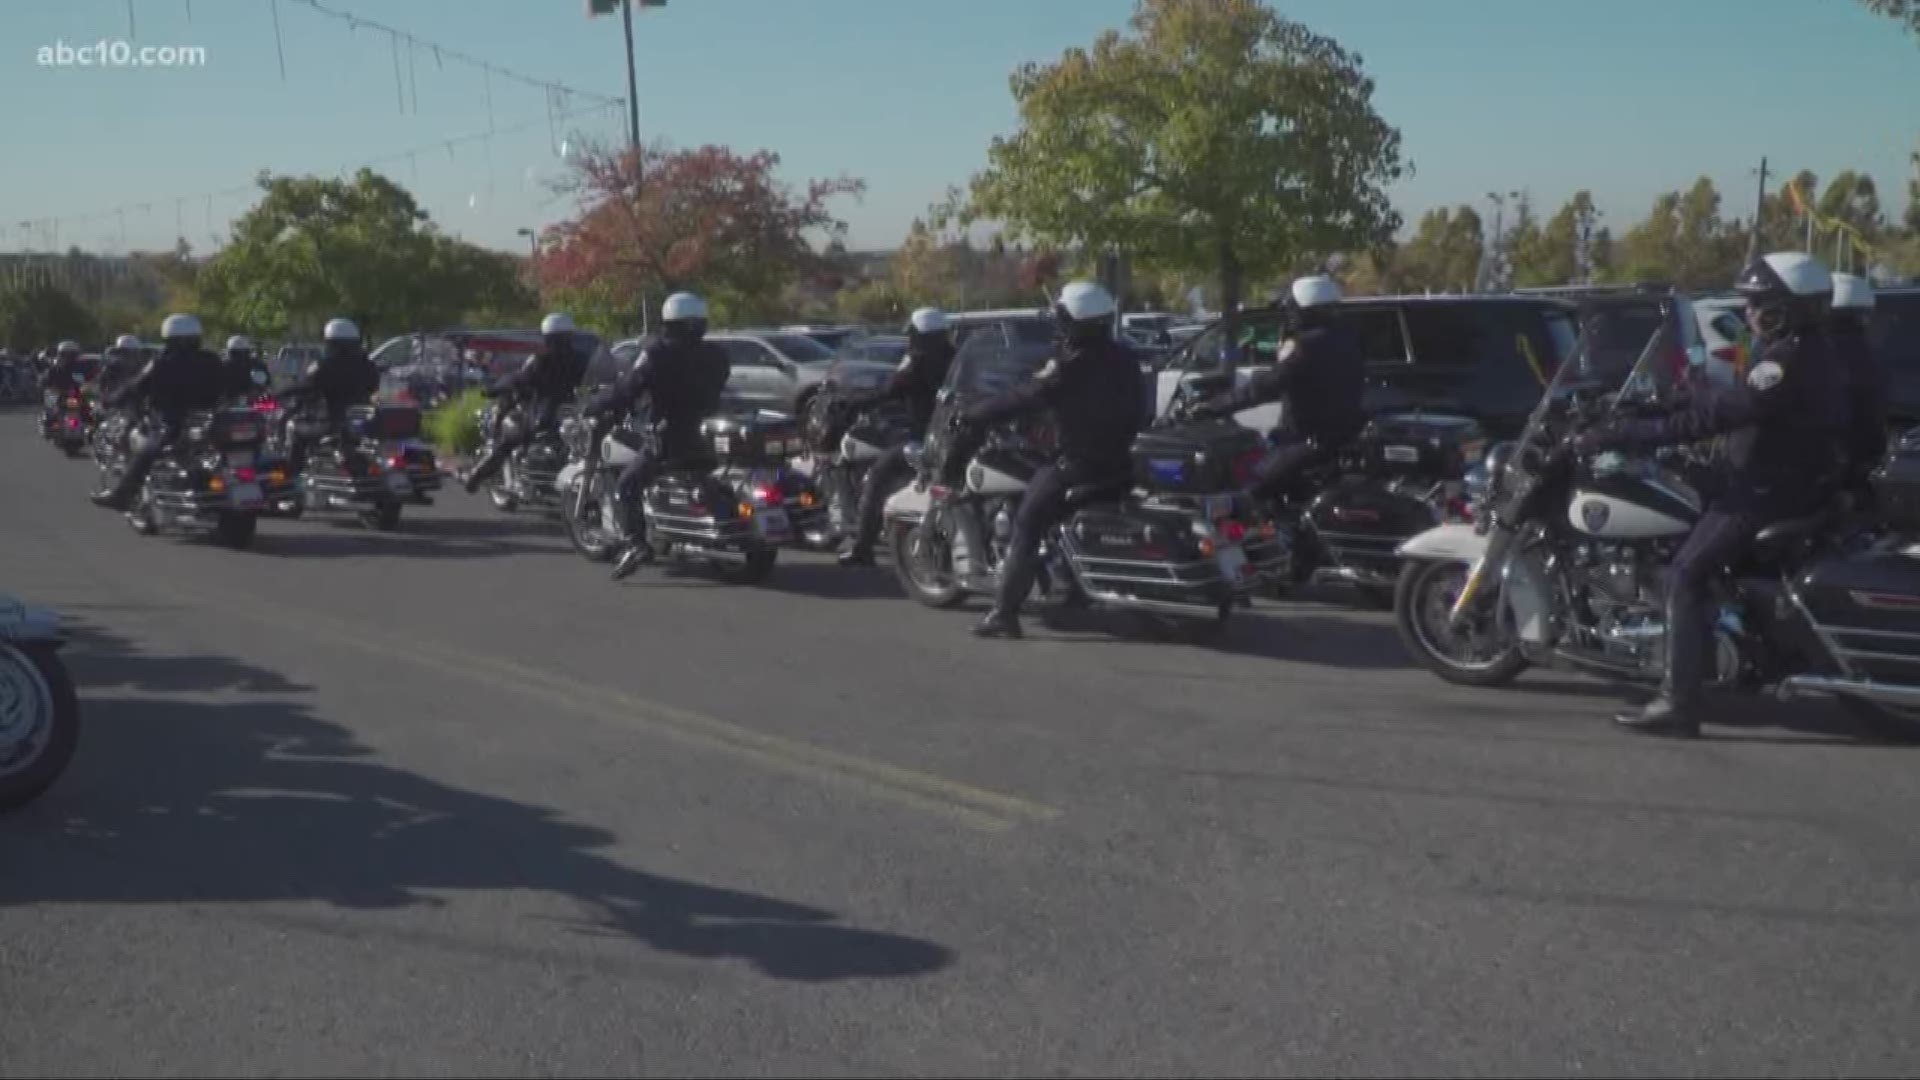 Law enforcement agencies from all over California attended Deputy Brian Ishmael's funeral service and processional.